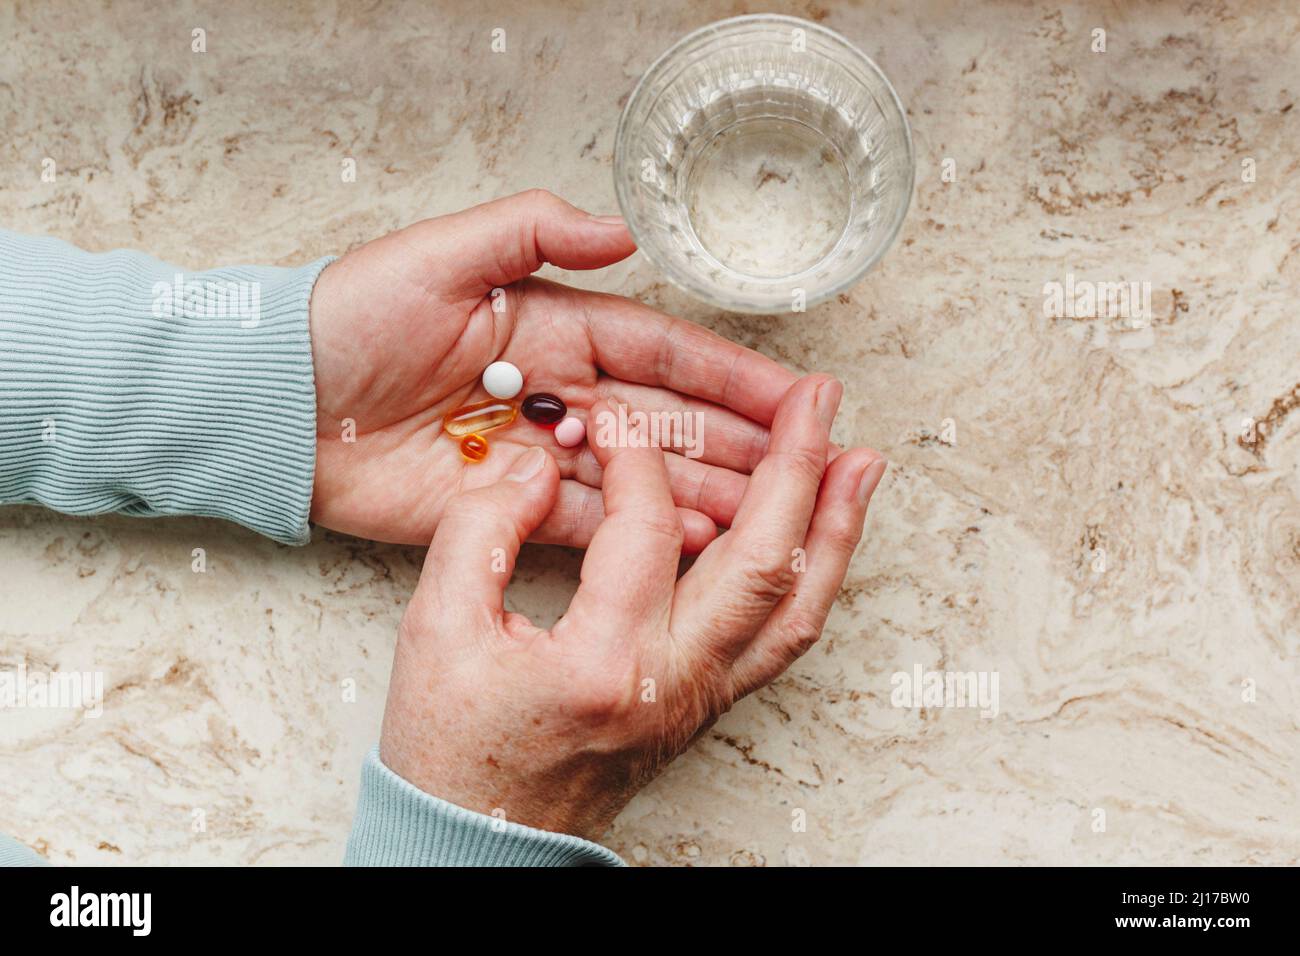 Senior woman taking medicinal pills with glass of water Stock Photo